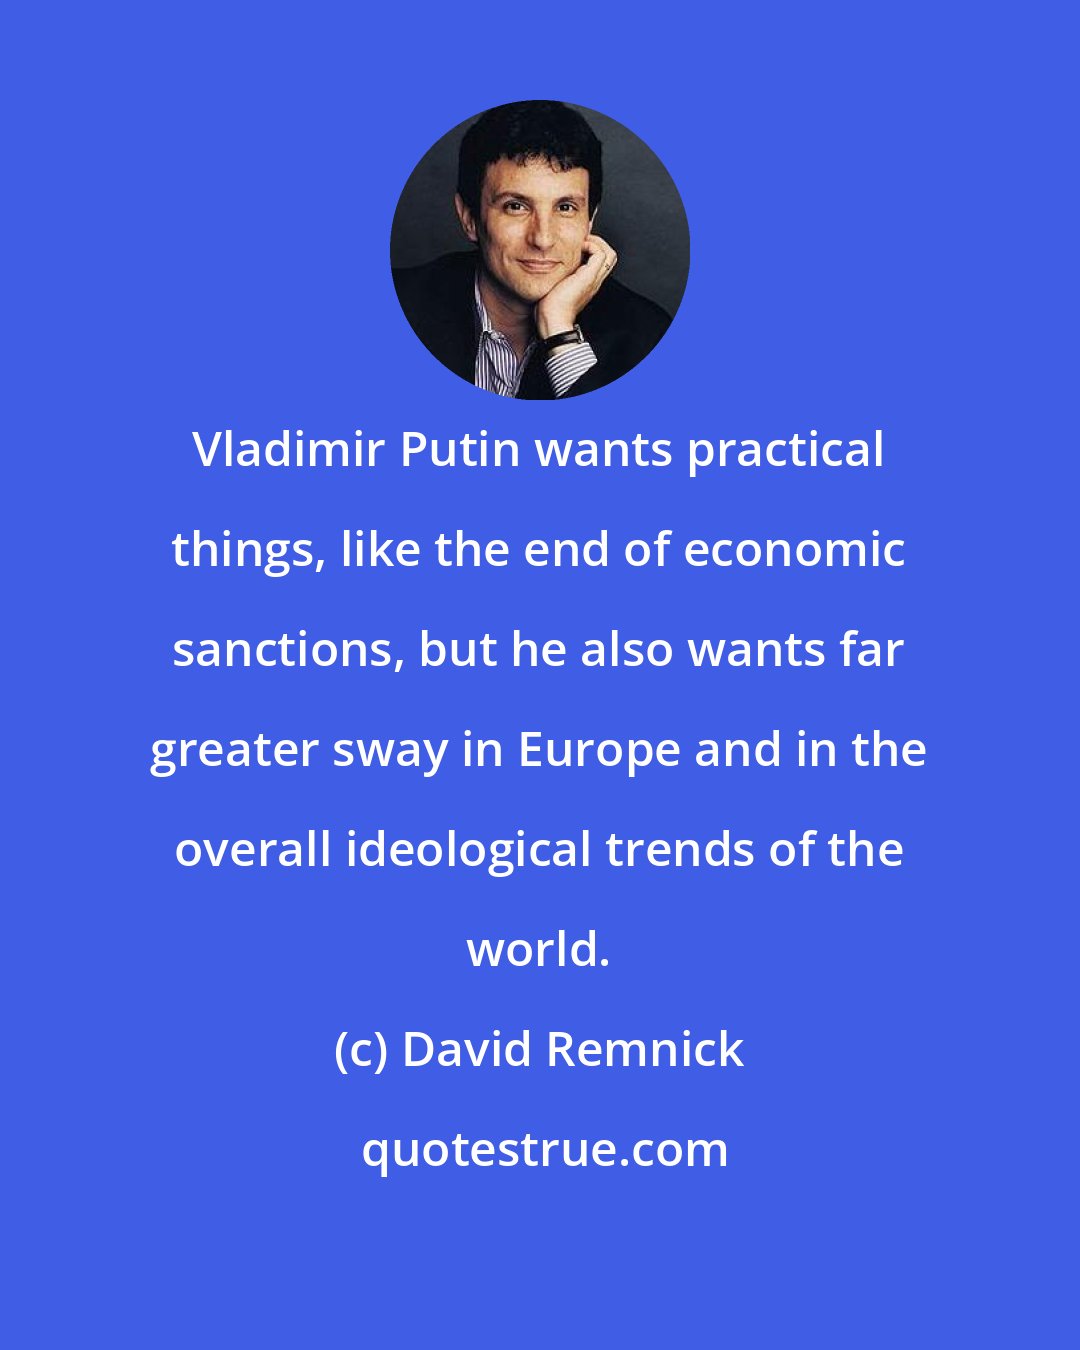 David Remnick: Vladimir Putin wants practical things, like the end of economic sanctions, but he also wants far greater sway in Europe and in the overall ideological trends of the world.